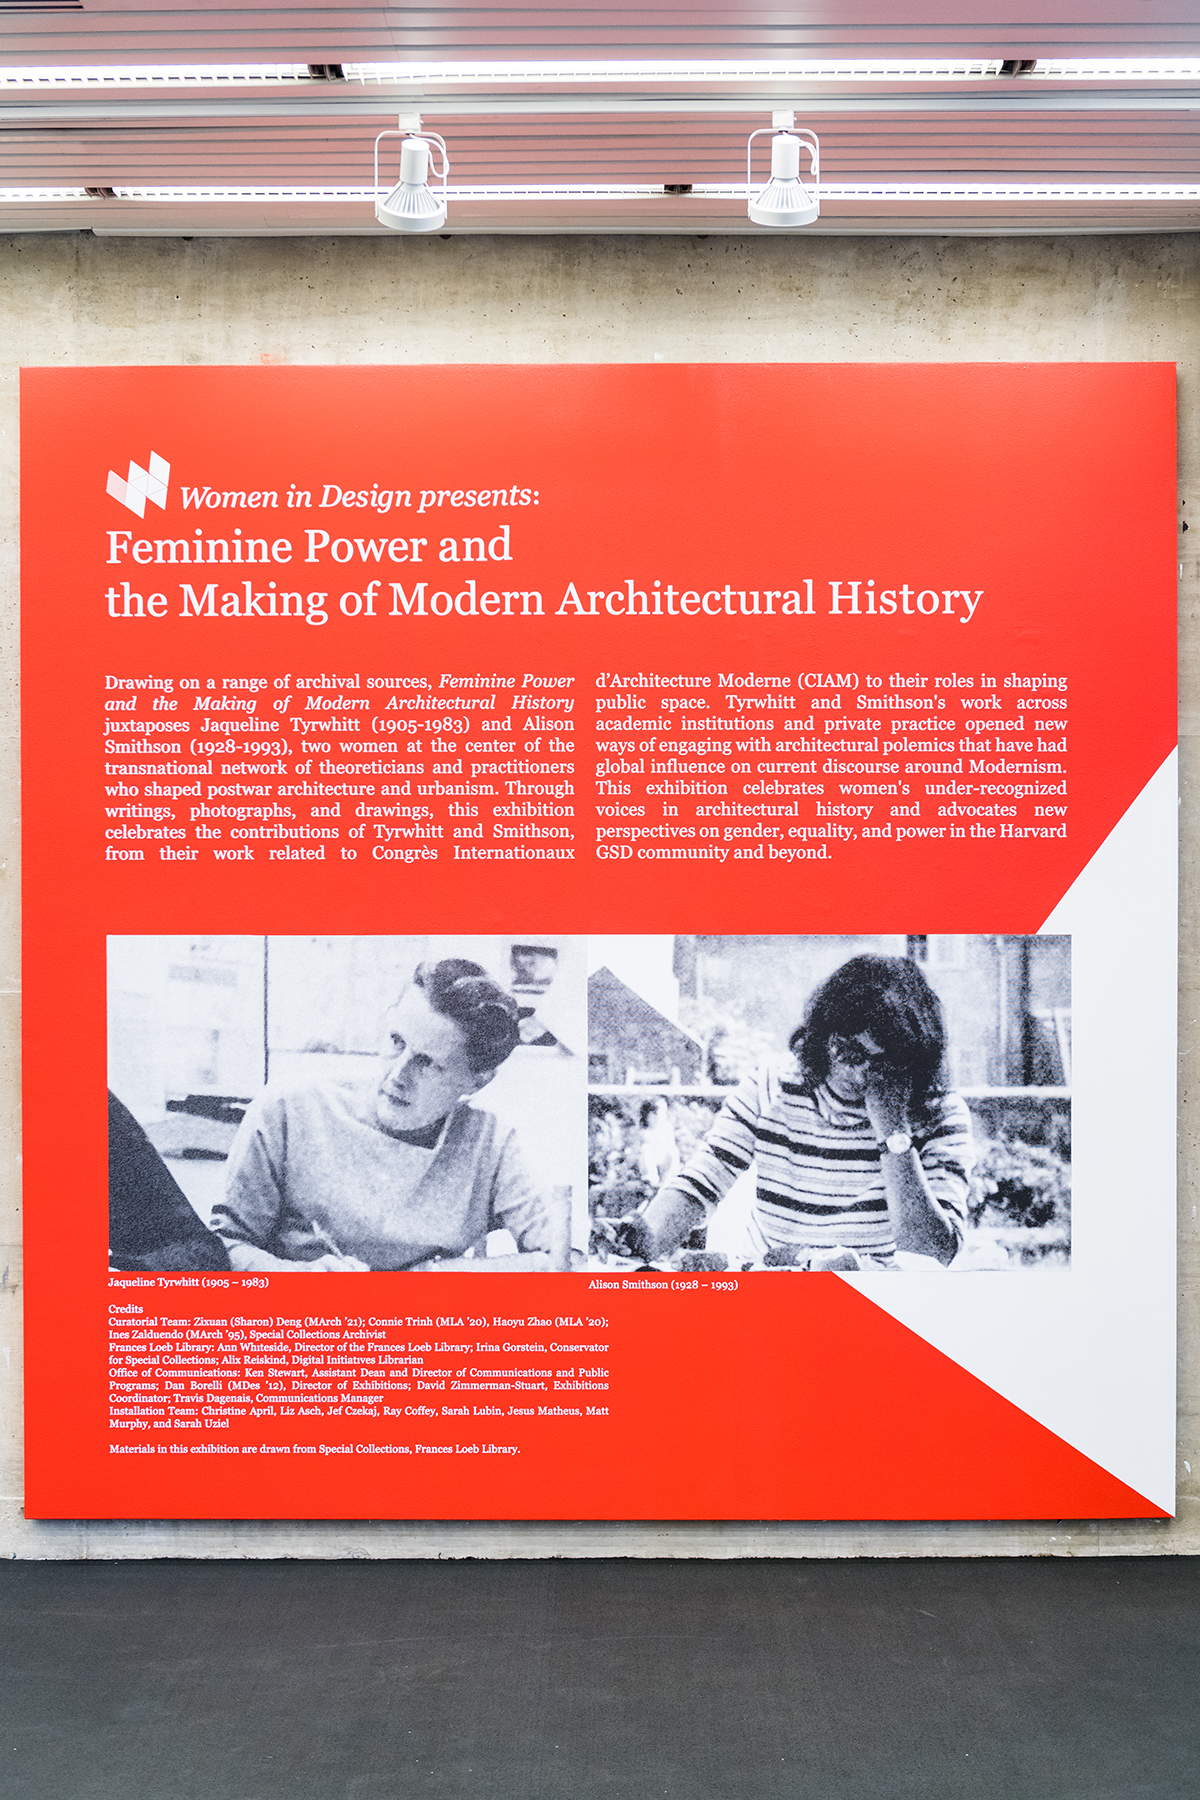 Feminine Power and the Making of Modern Architectural History - Harvard  Graduate School of Design